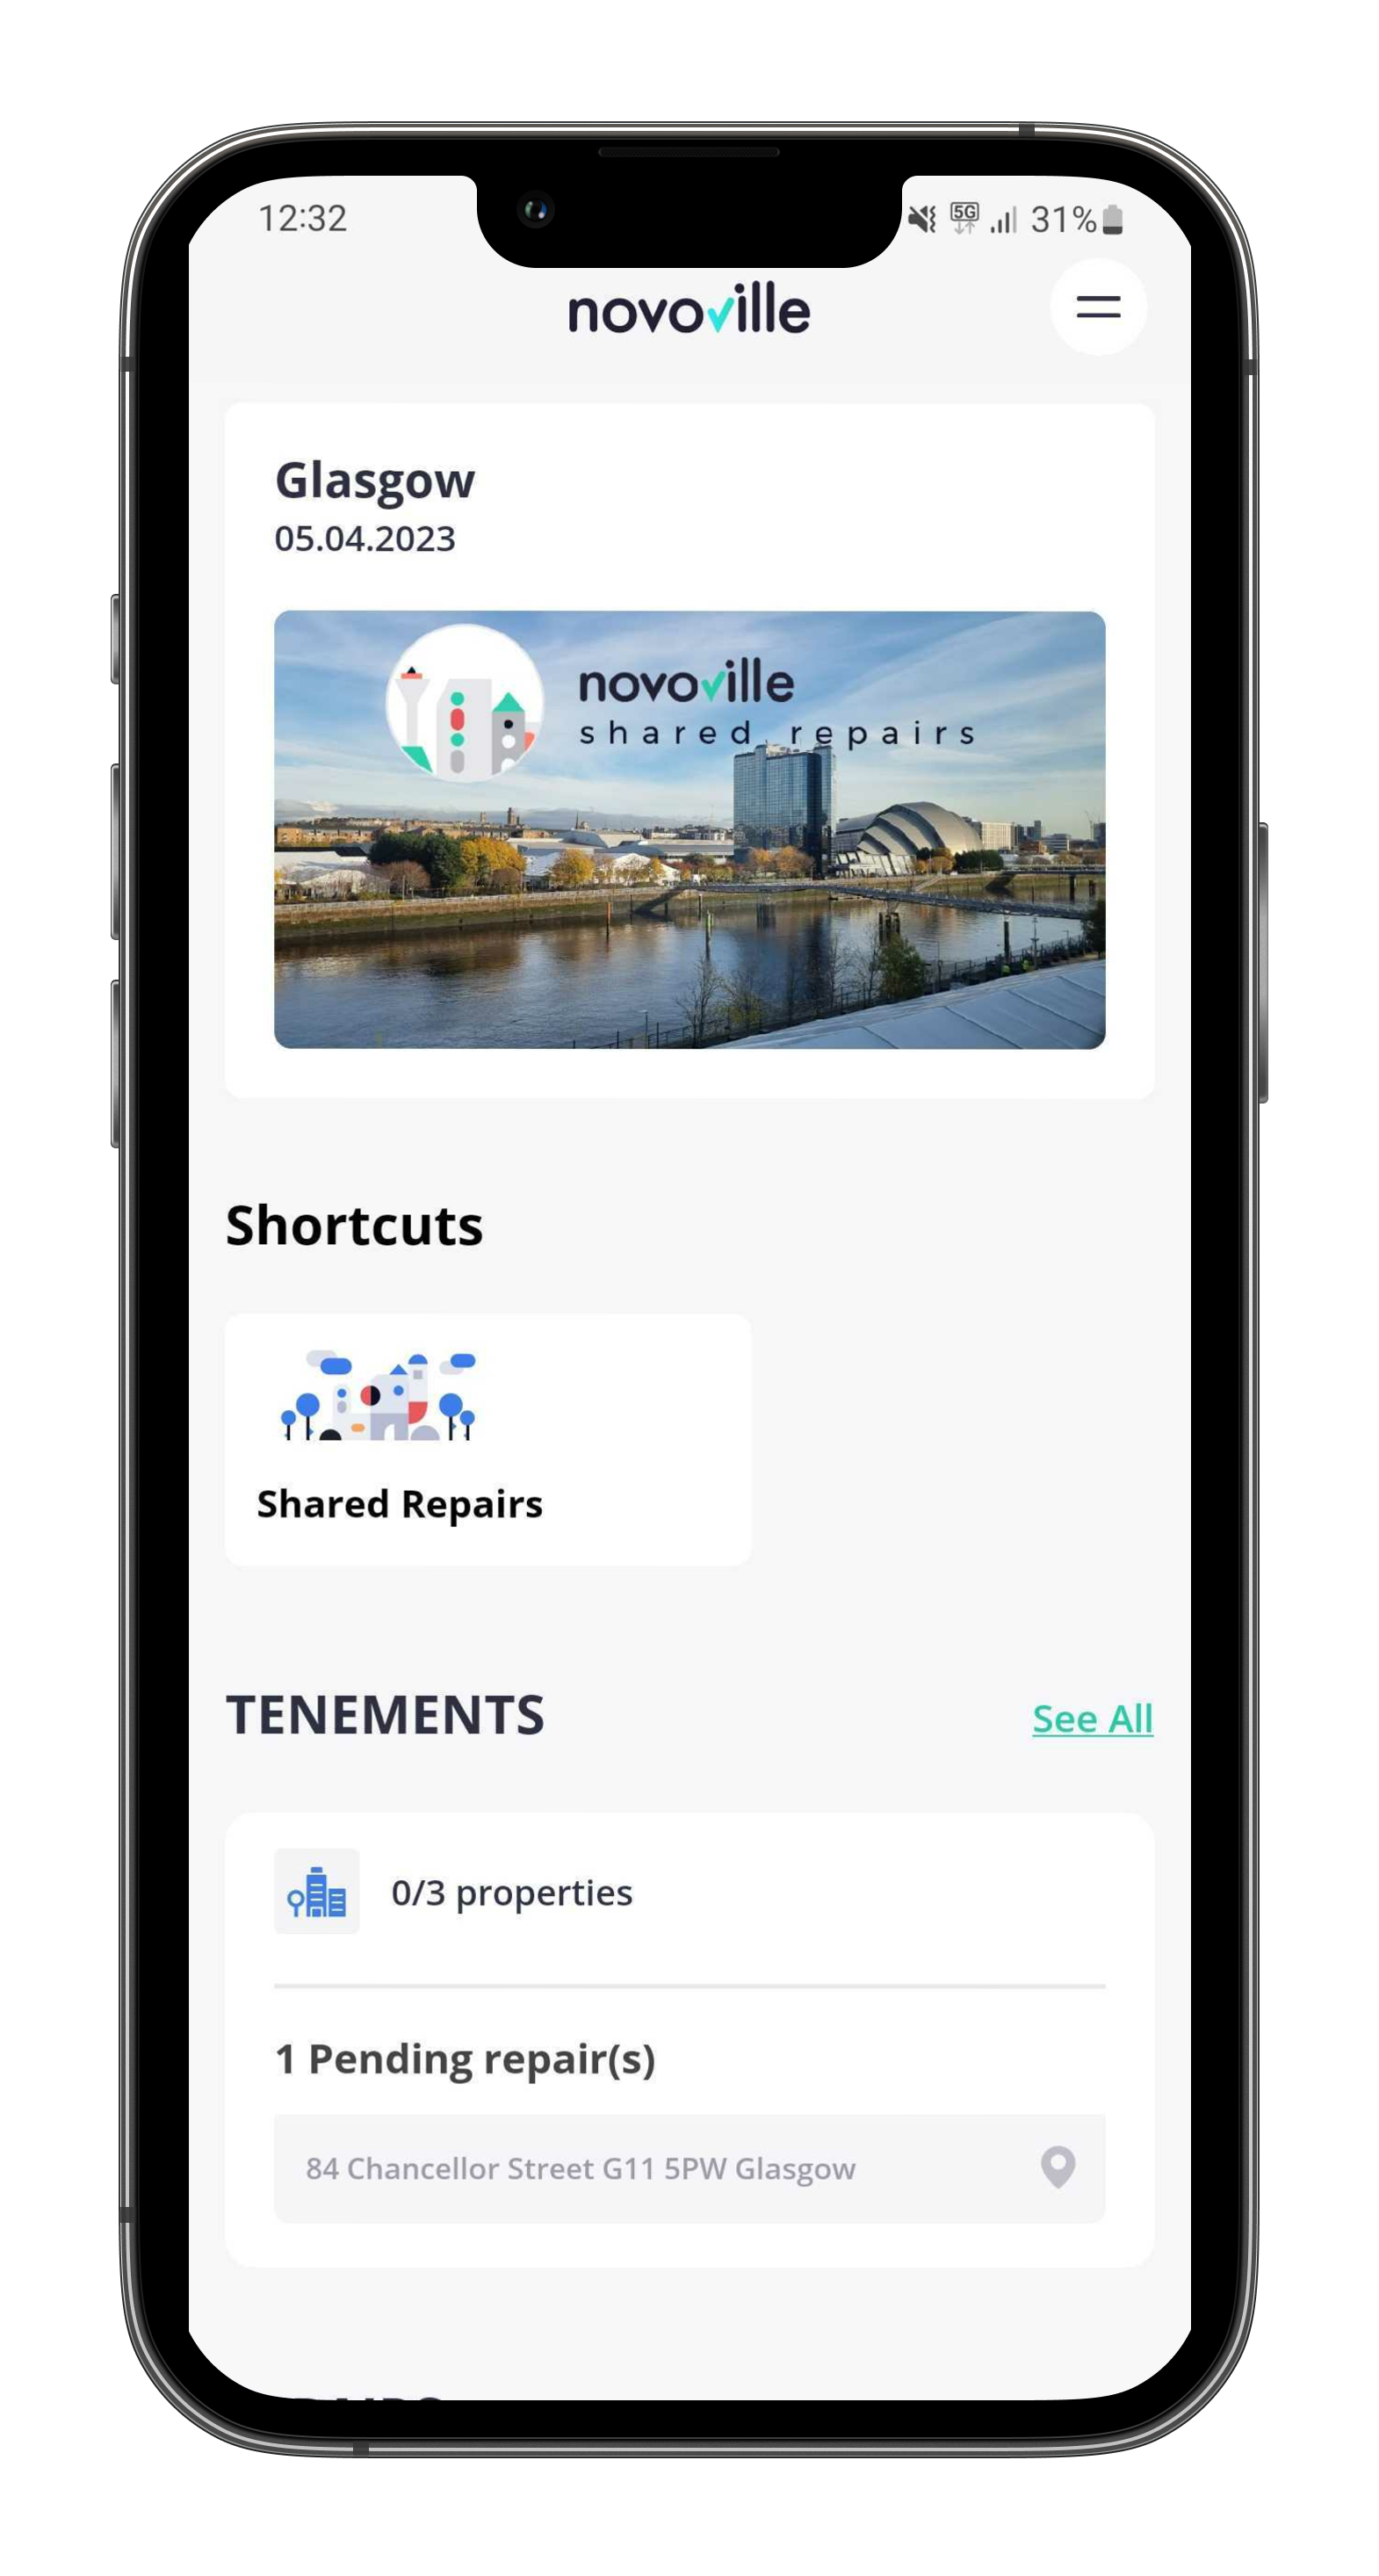 Novoville Shared Repairs is now Live in Glasgow.